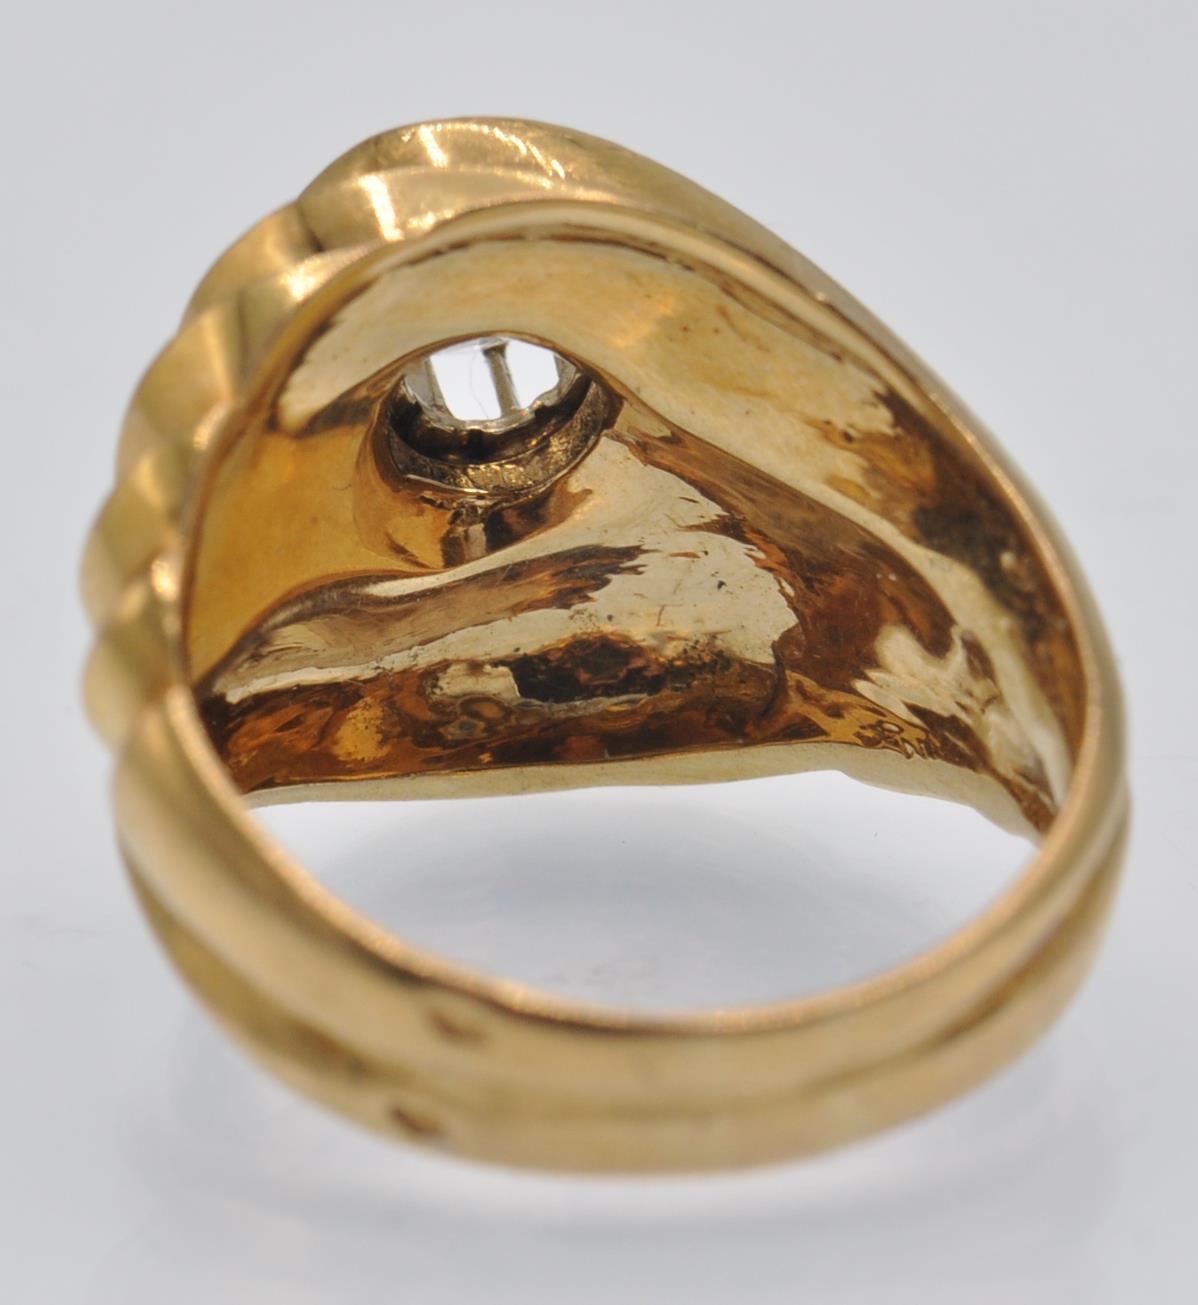 A French Art Deco 18ct Gold & Diamond Ring - Image 5 of 5